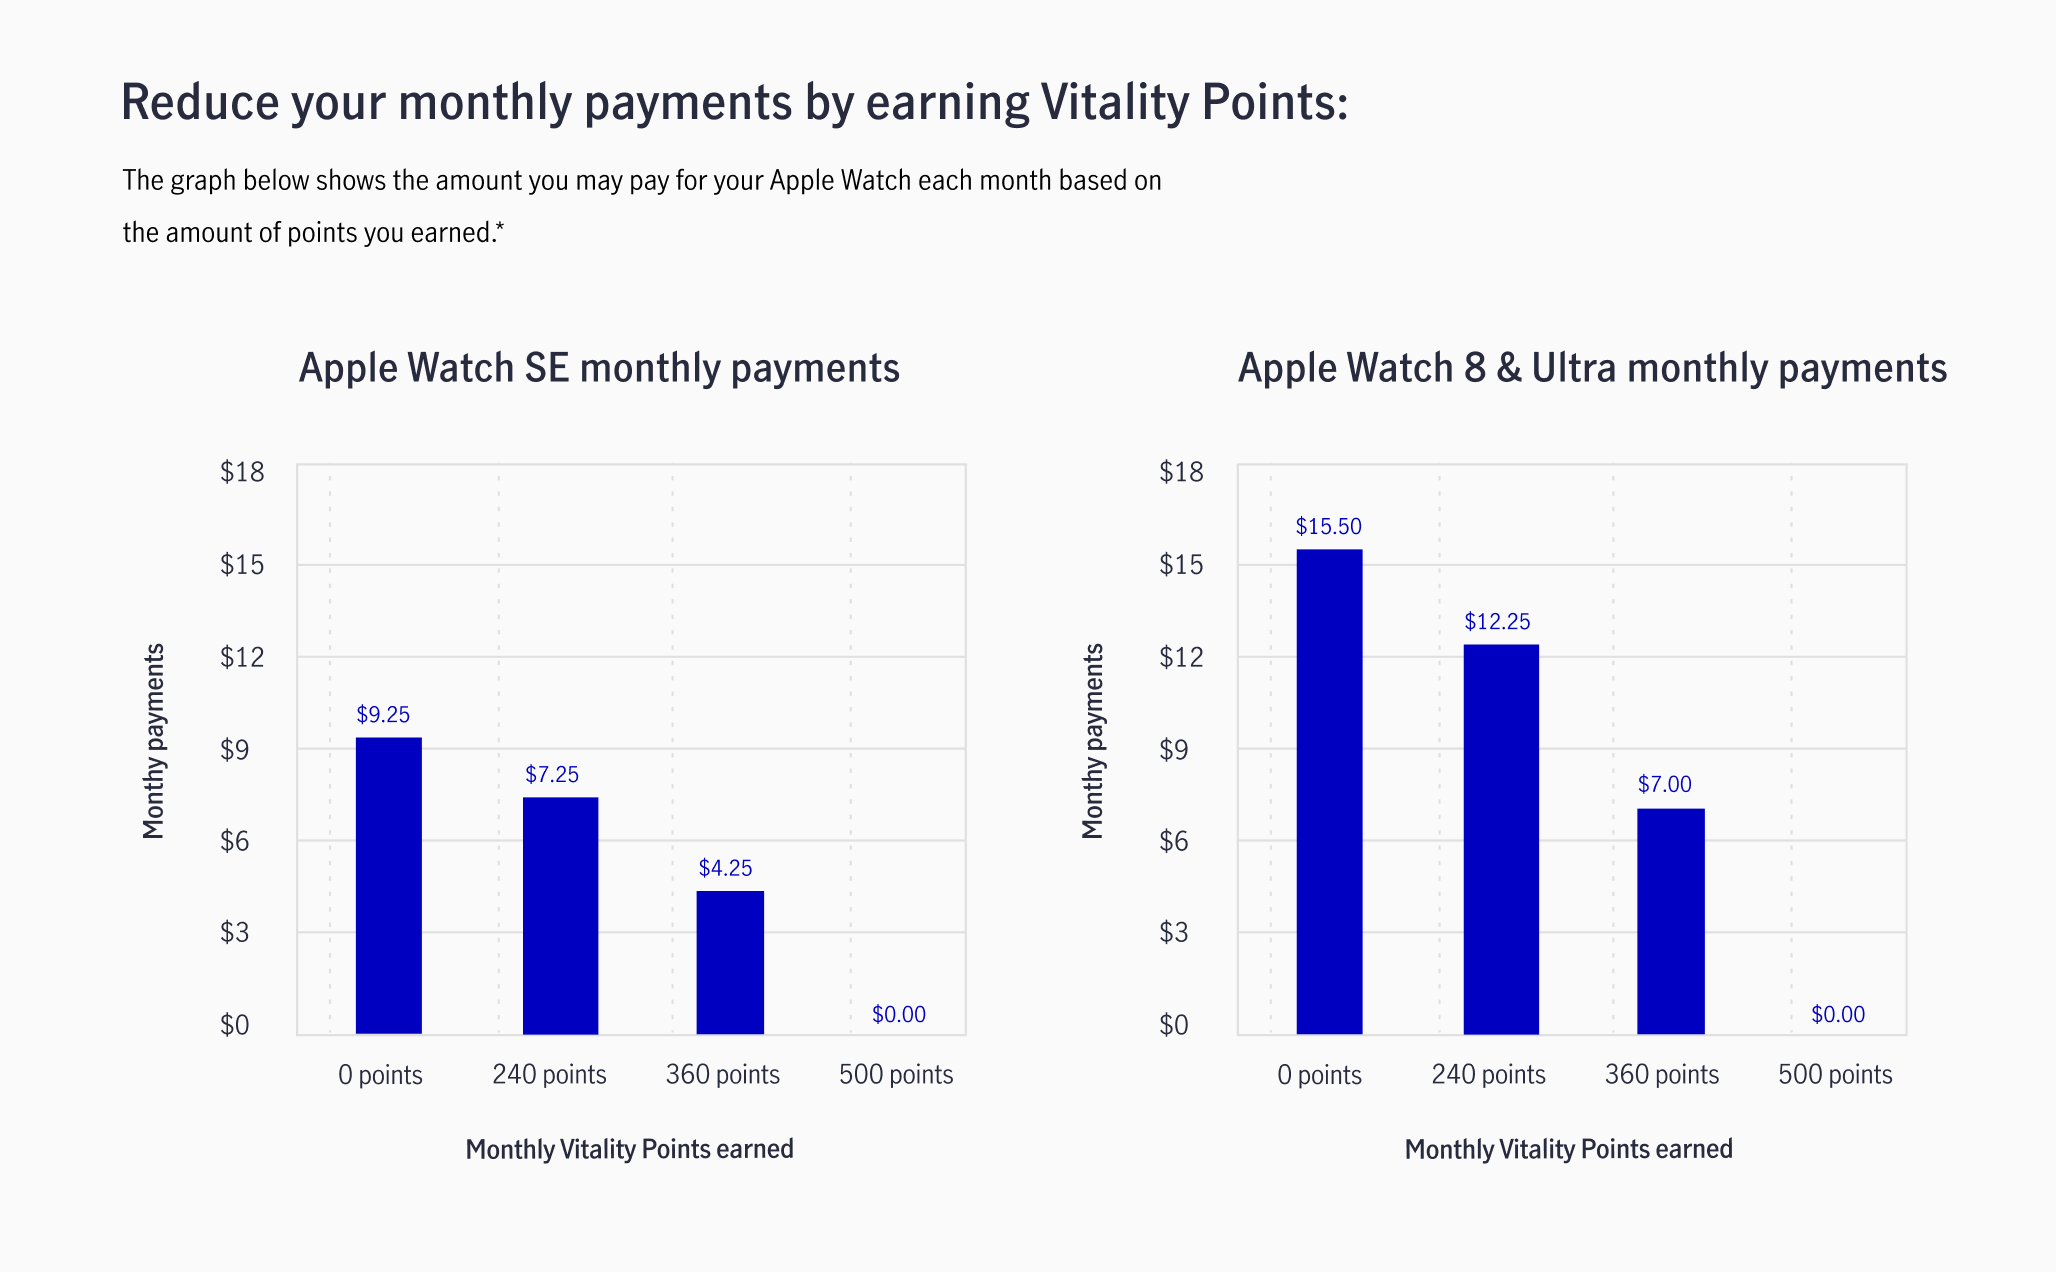 Earn 0 Vitality Points/month and pay $15/month for your Apple Watch, earn 240 Vitality Points/month and pay $12.25/month for your Apple Watch, earn 360 Vitality Points/month and pay $7/month for your Apple Watch, earn 500 Vitality Points/month and pay $0/month for your Apple Watch